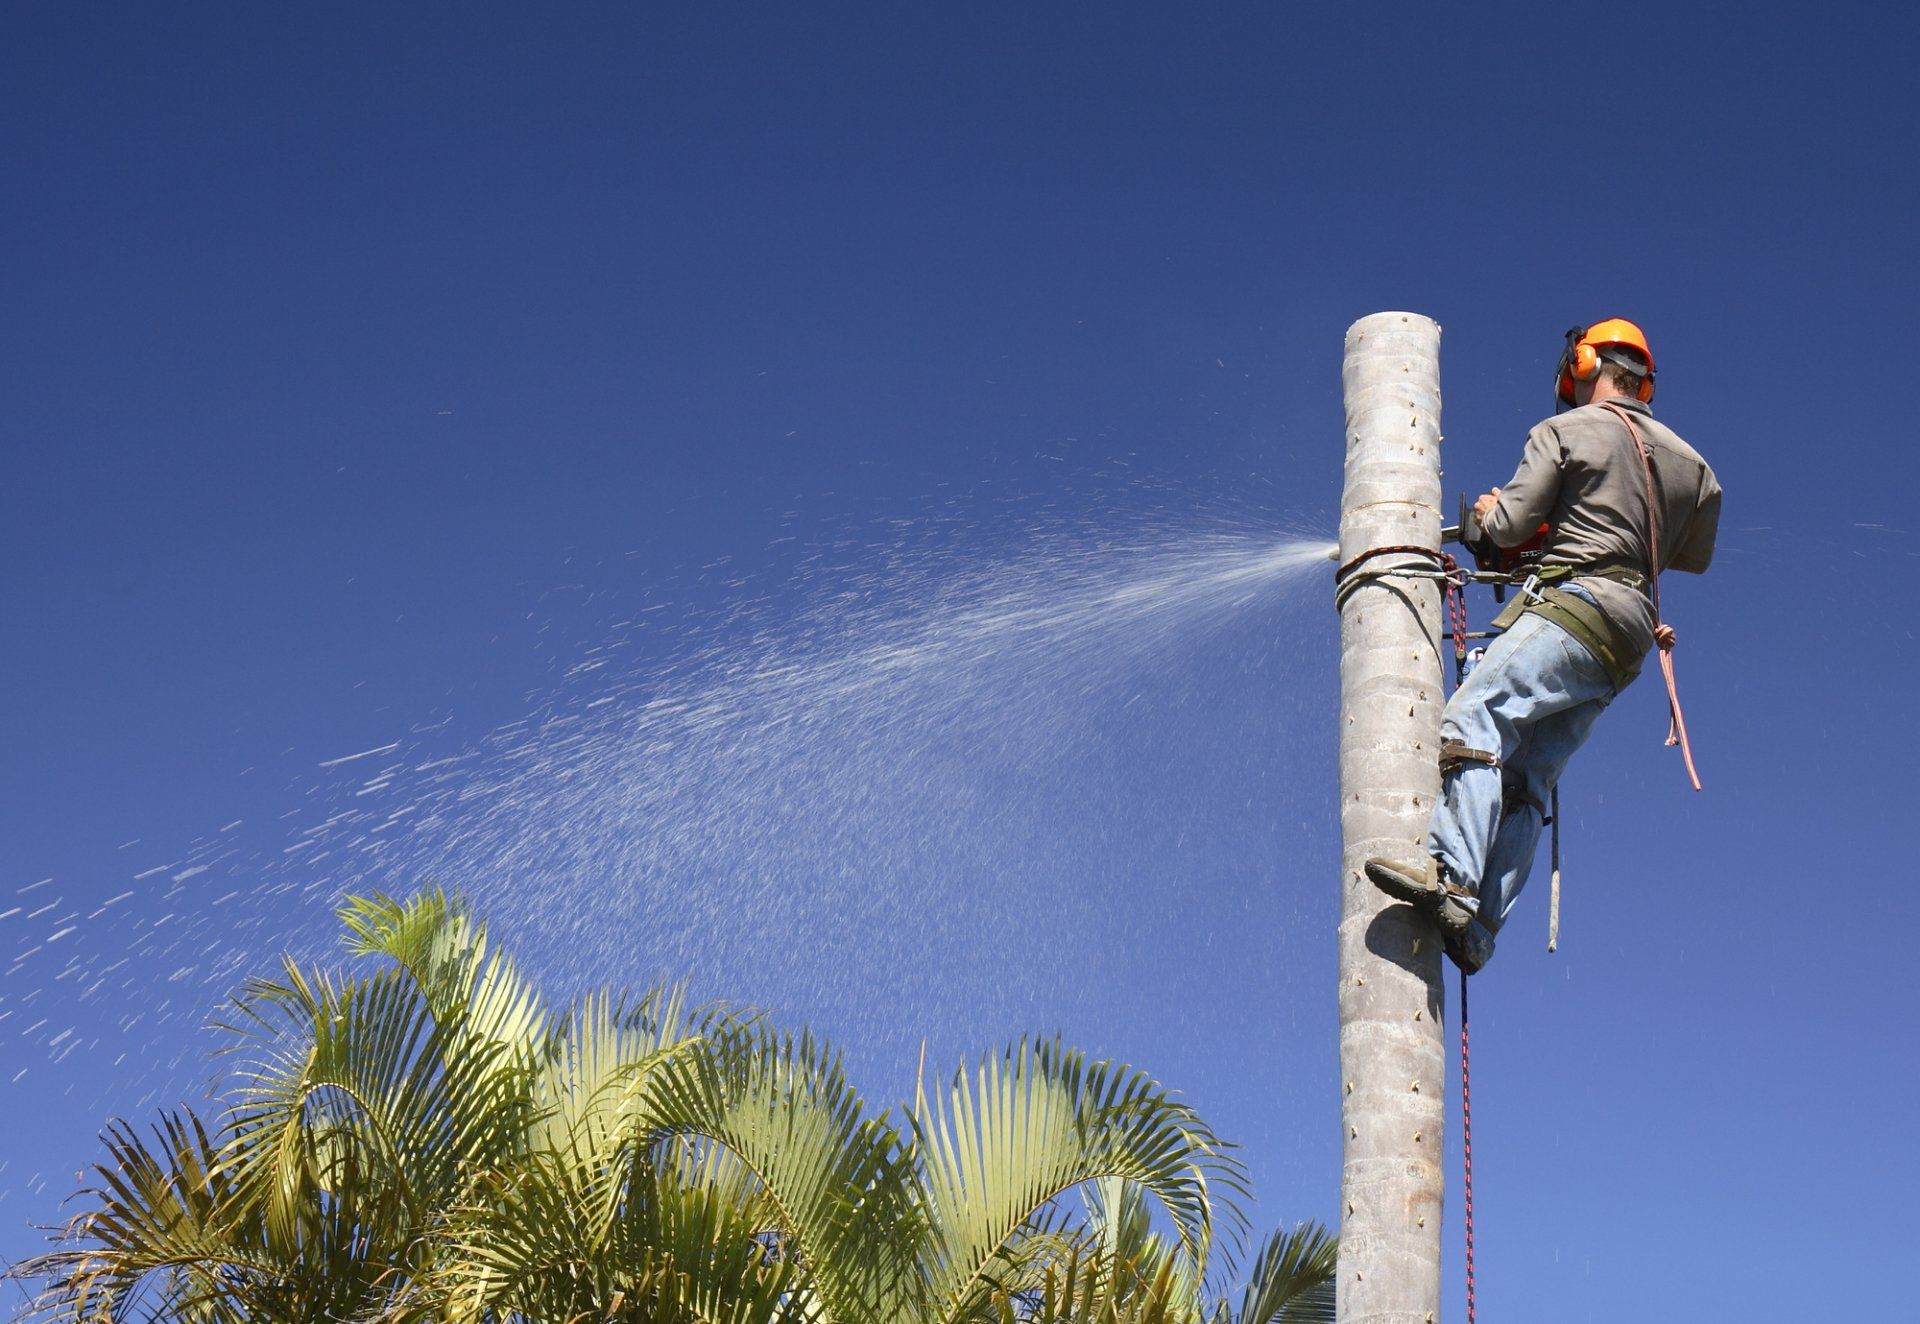 Tree care professional from Real Tree Team cutting the palm tree down starting from the top section